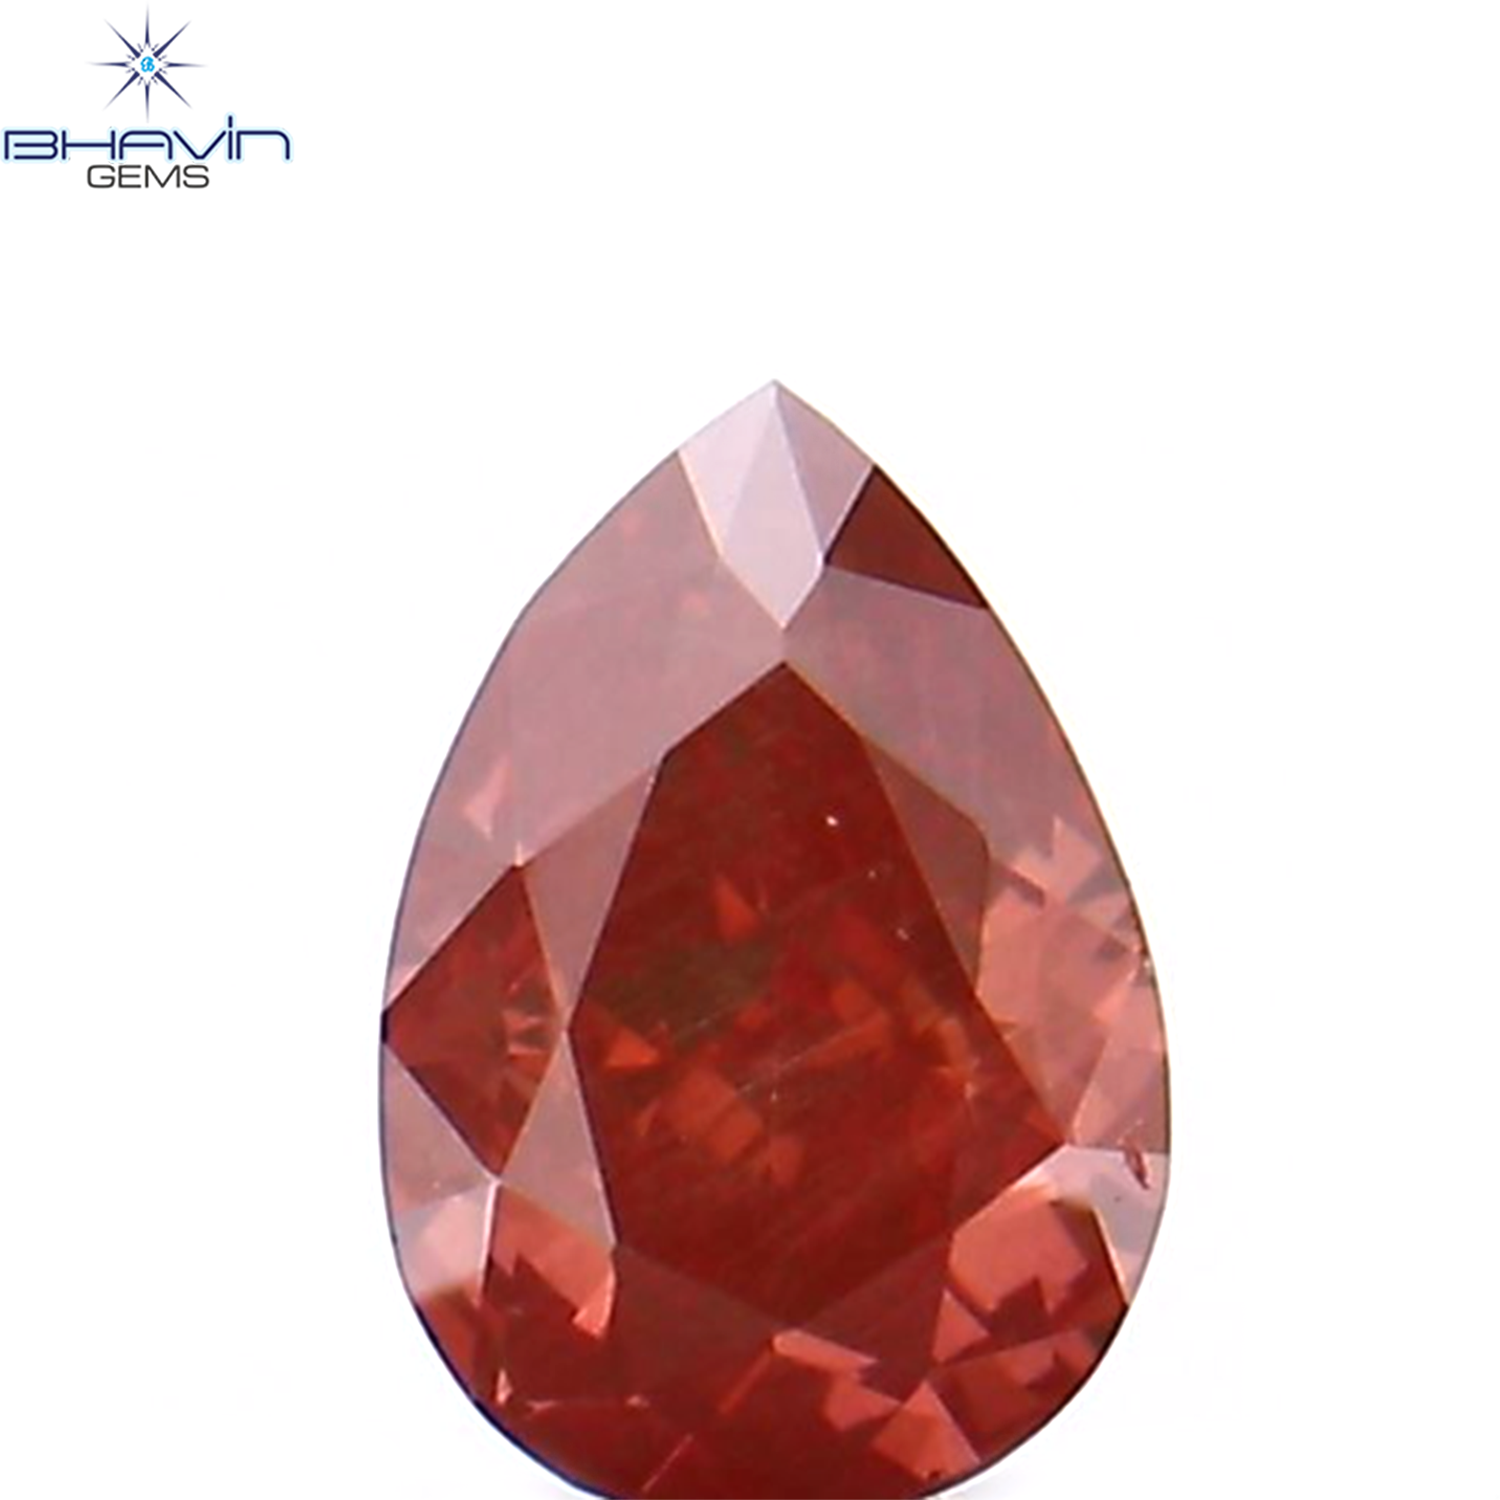 0.10 CT Pear Shape Natural Diamond Pink Color VS2 Clarity (3.64 MM)